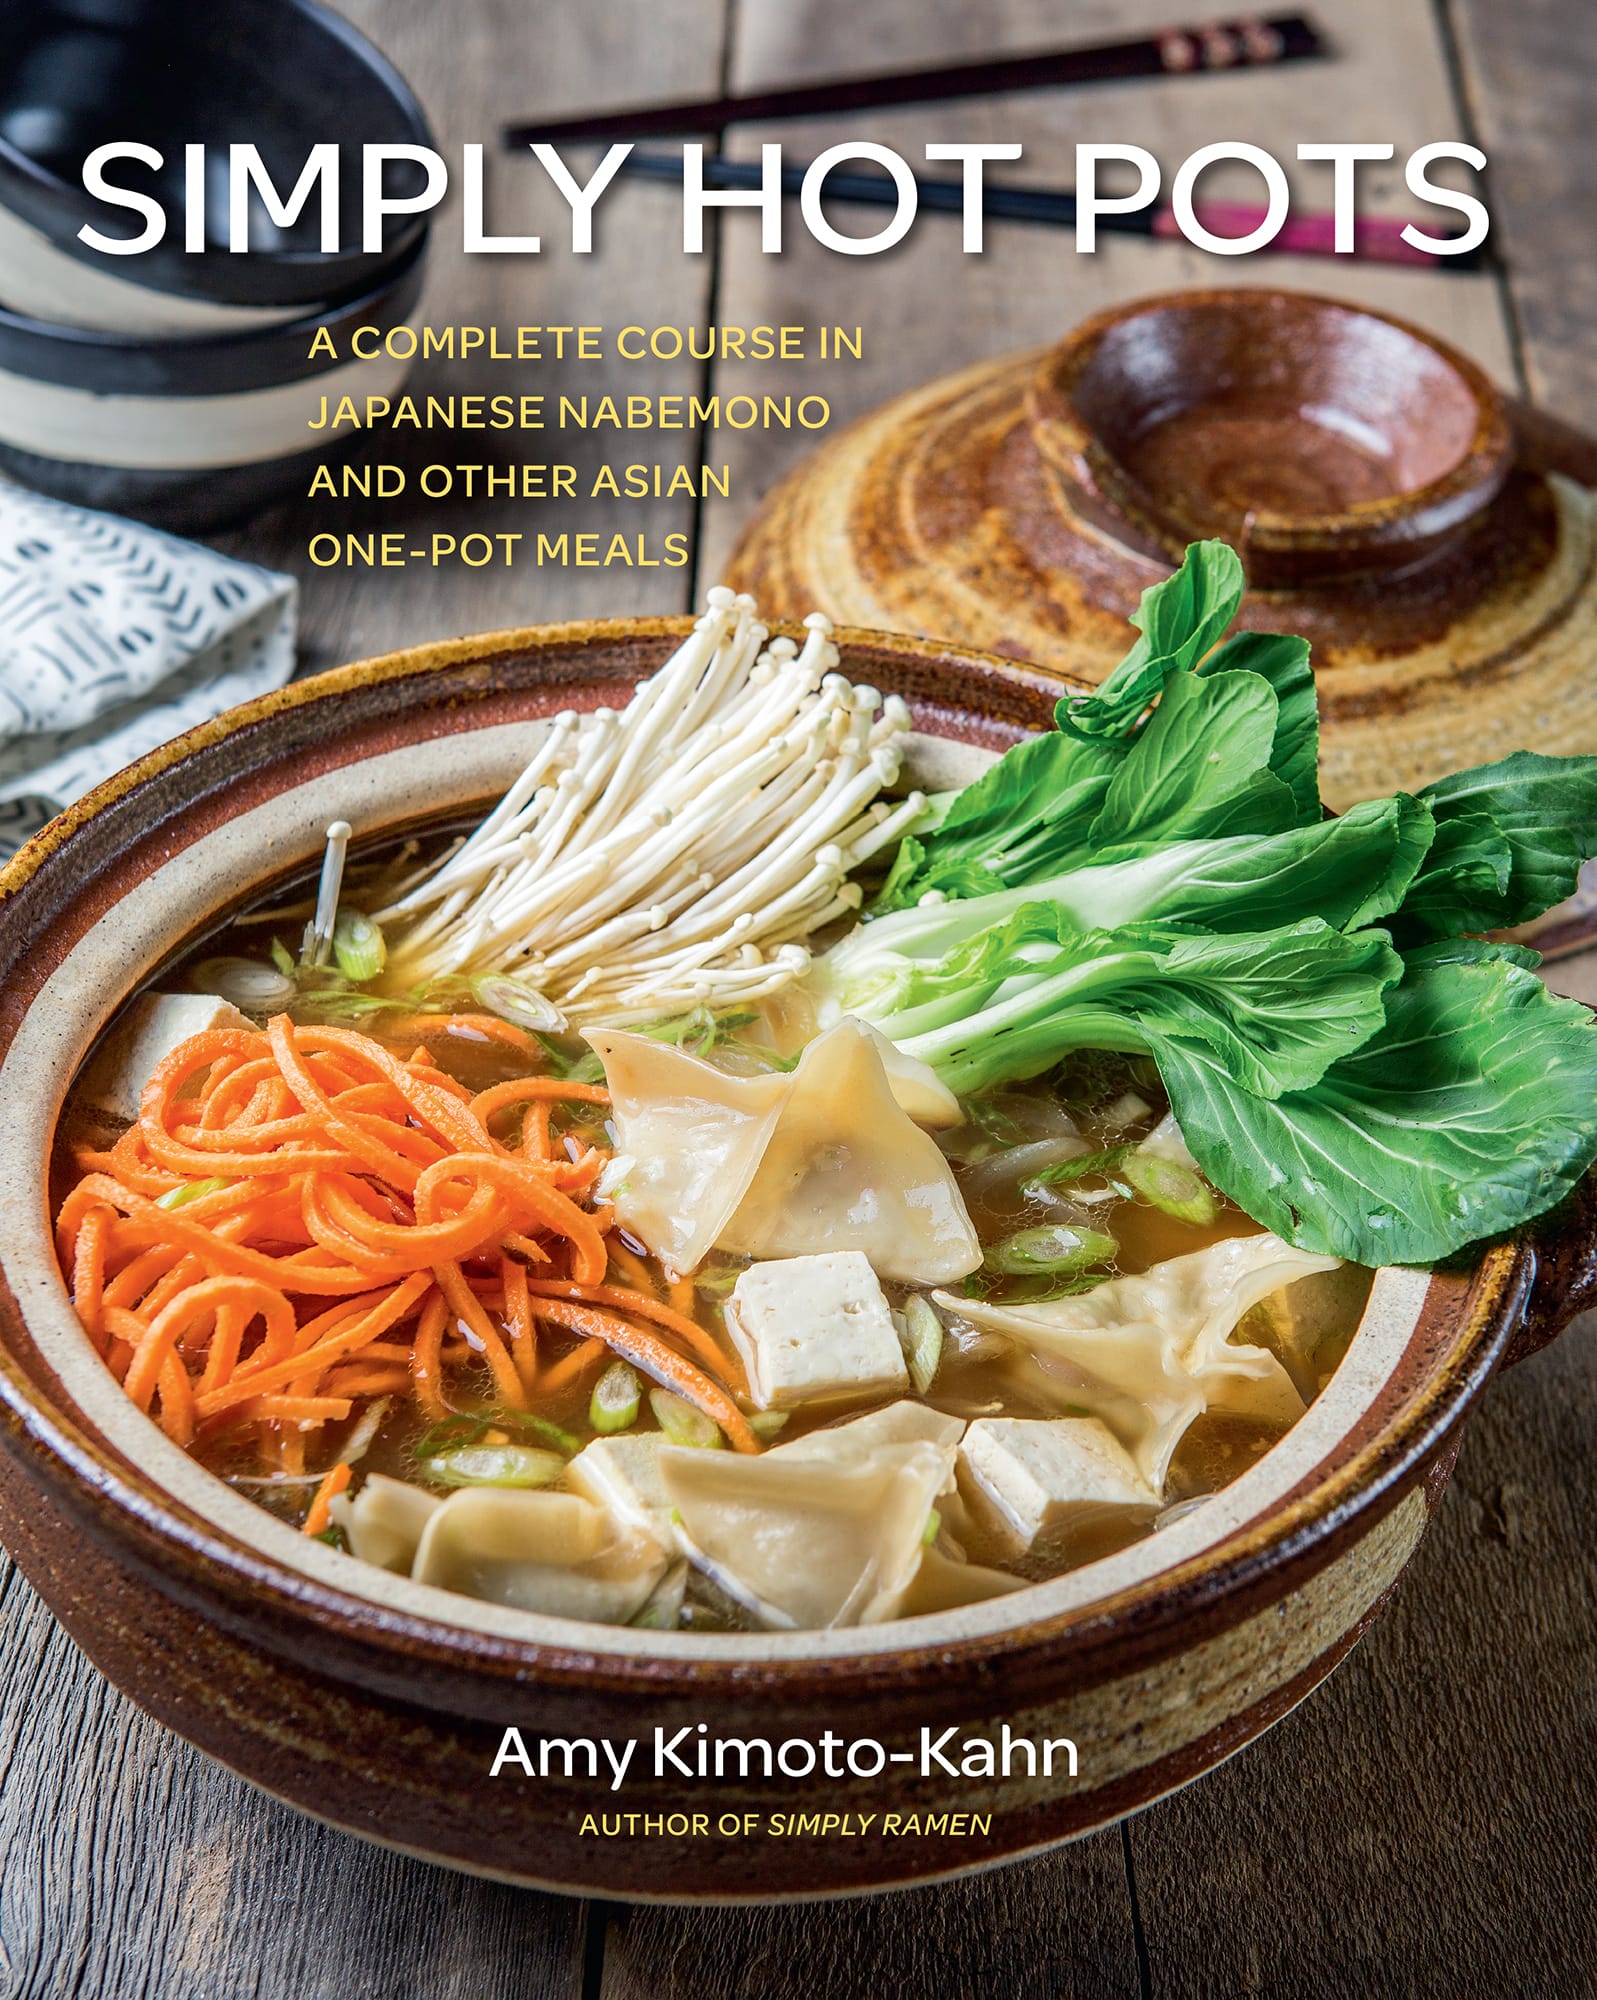 SIMPLY HOT POTS A COMPLETE COURSE IN JAPANESE NABEMONO AND OTHER ASIAN ONE-POT - photo 1